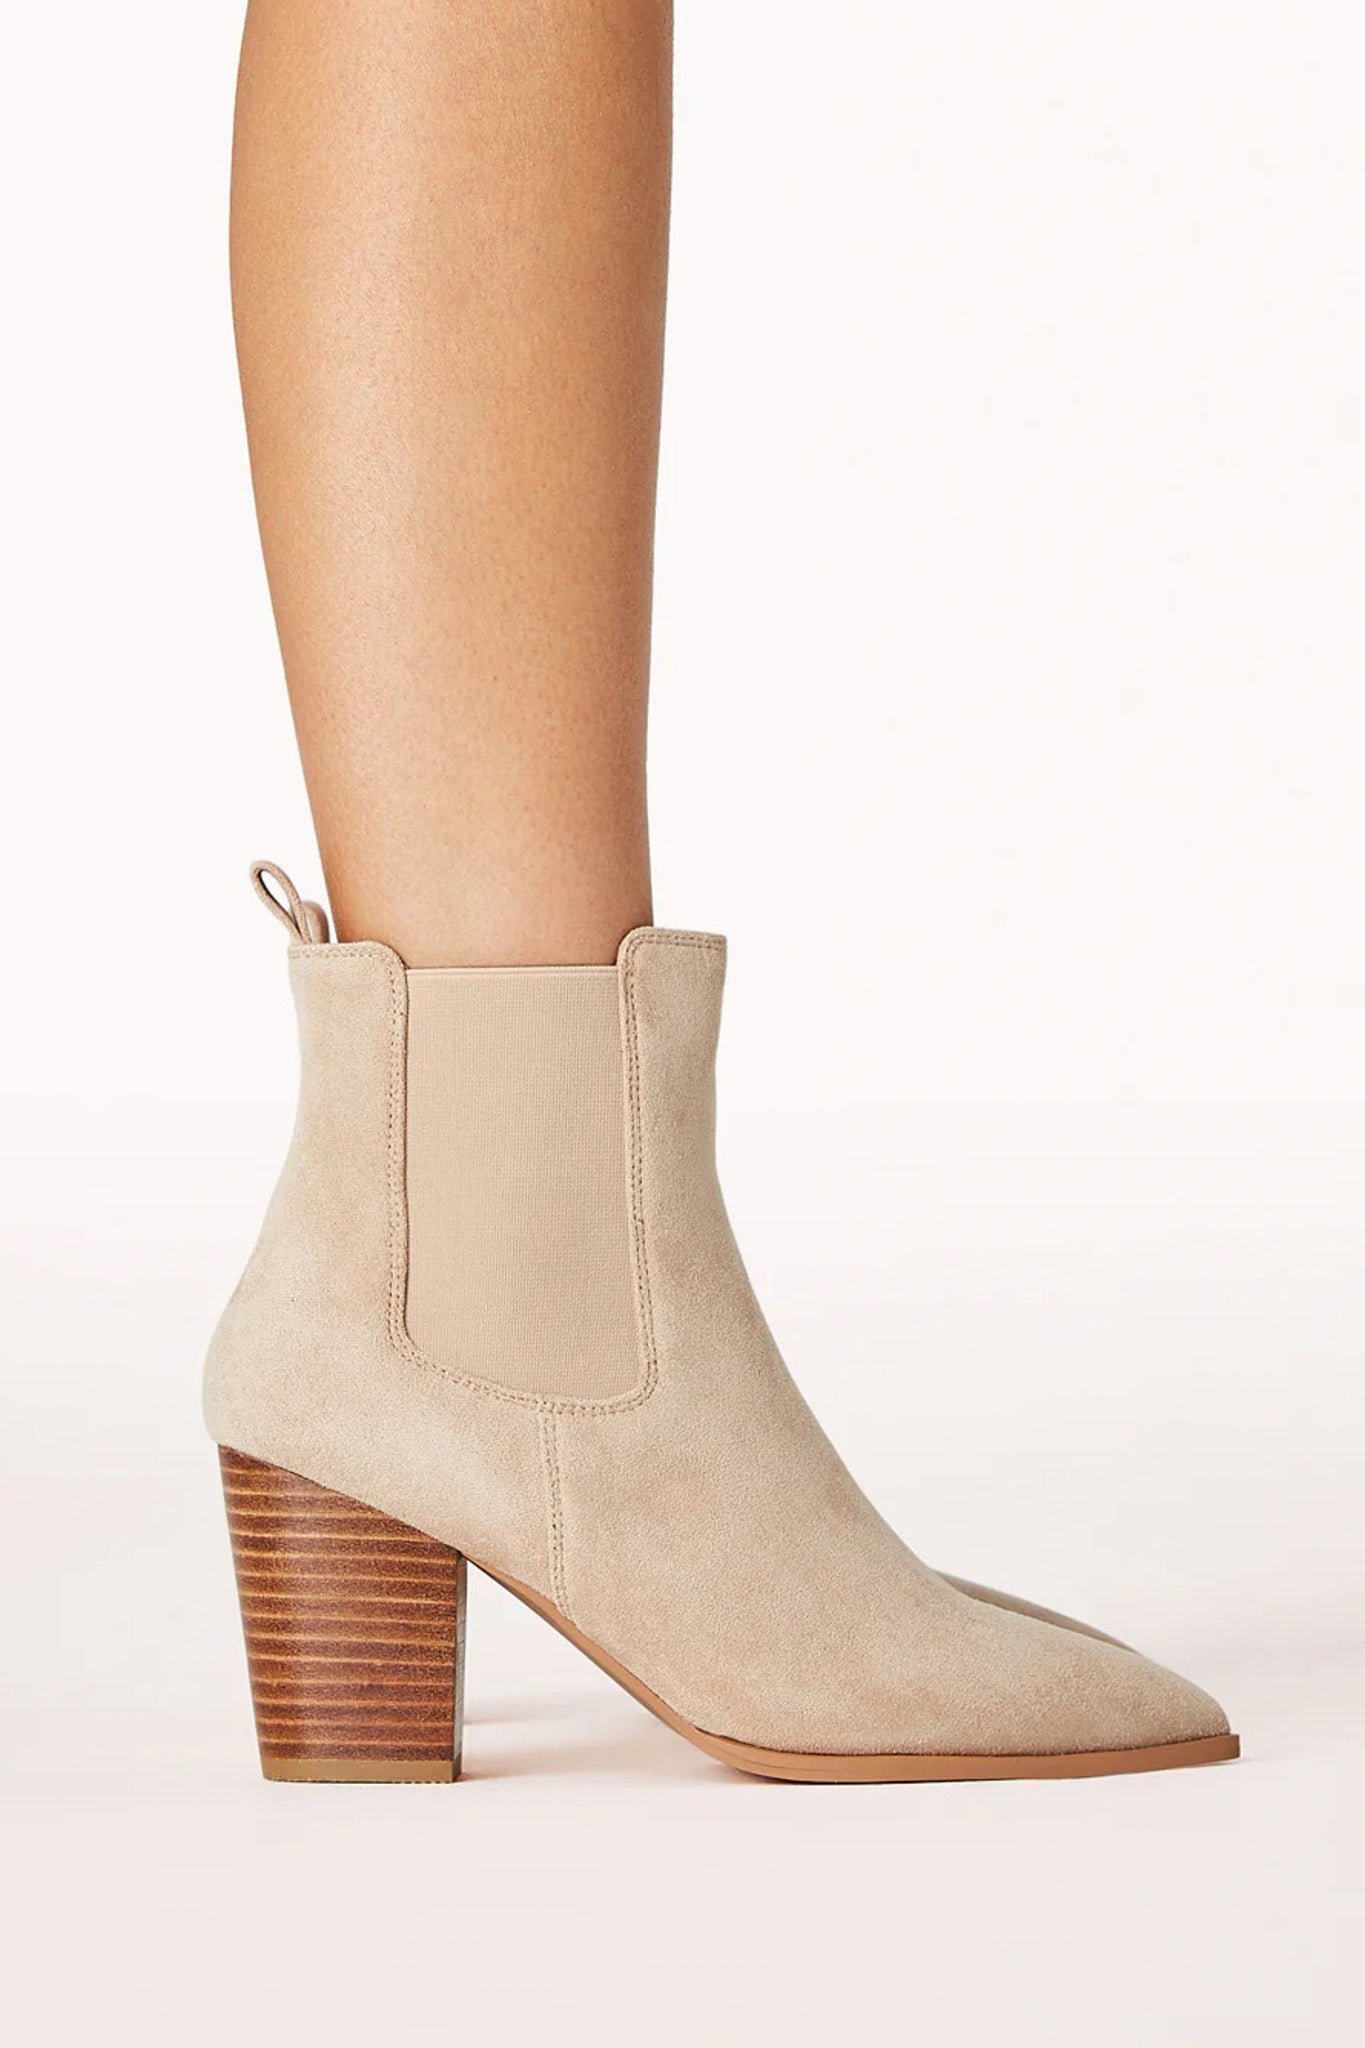 Baylor Boots - Biscuit Suede